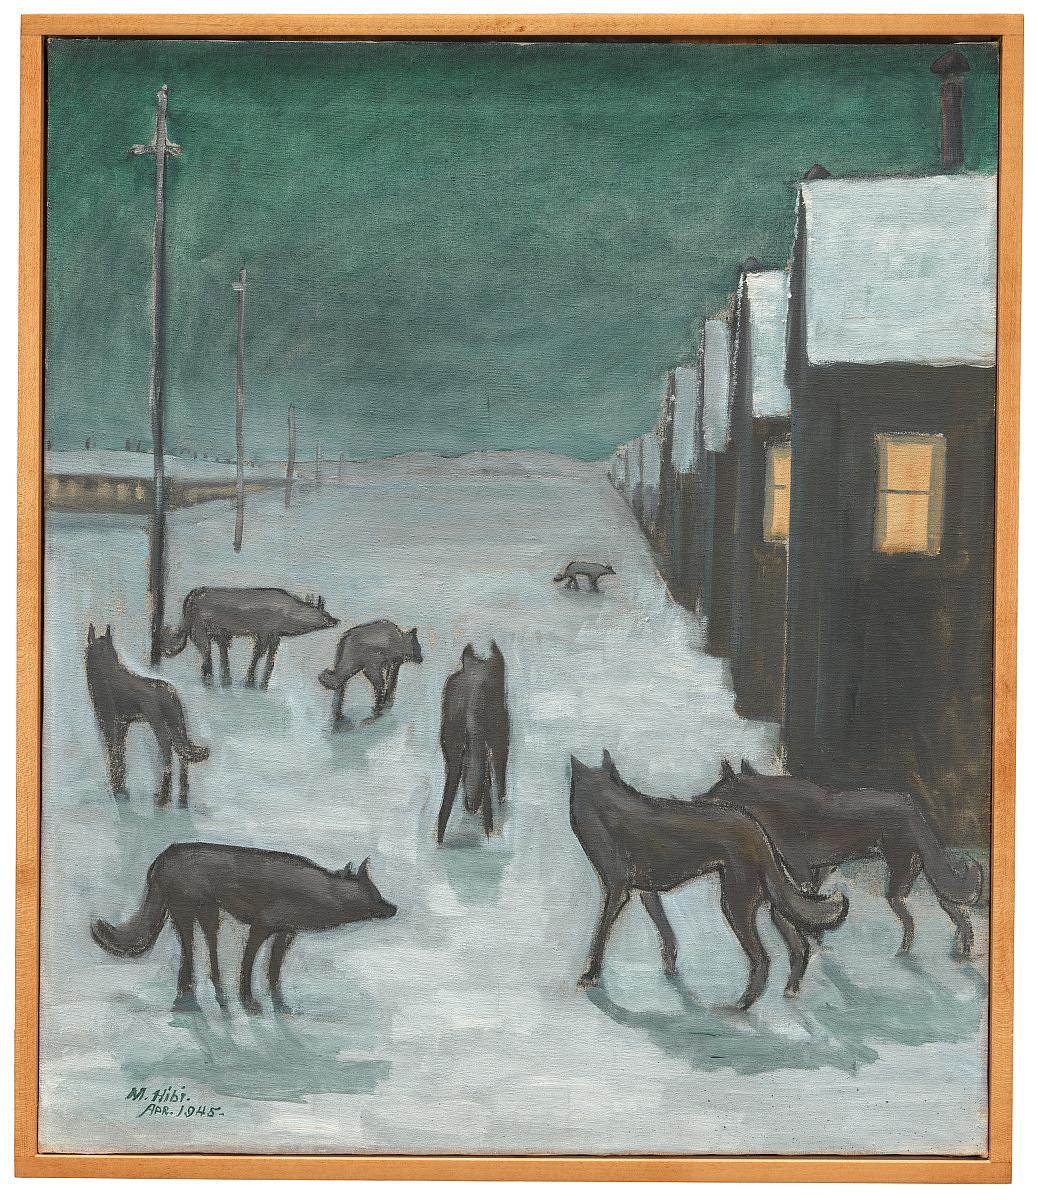 Painting of coyotes outside homes in a snowy desert